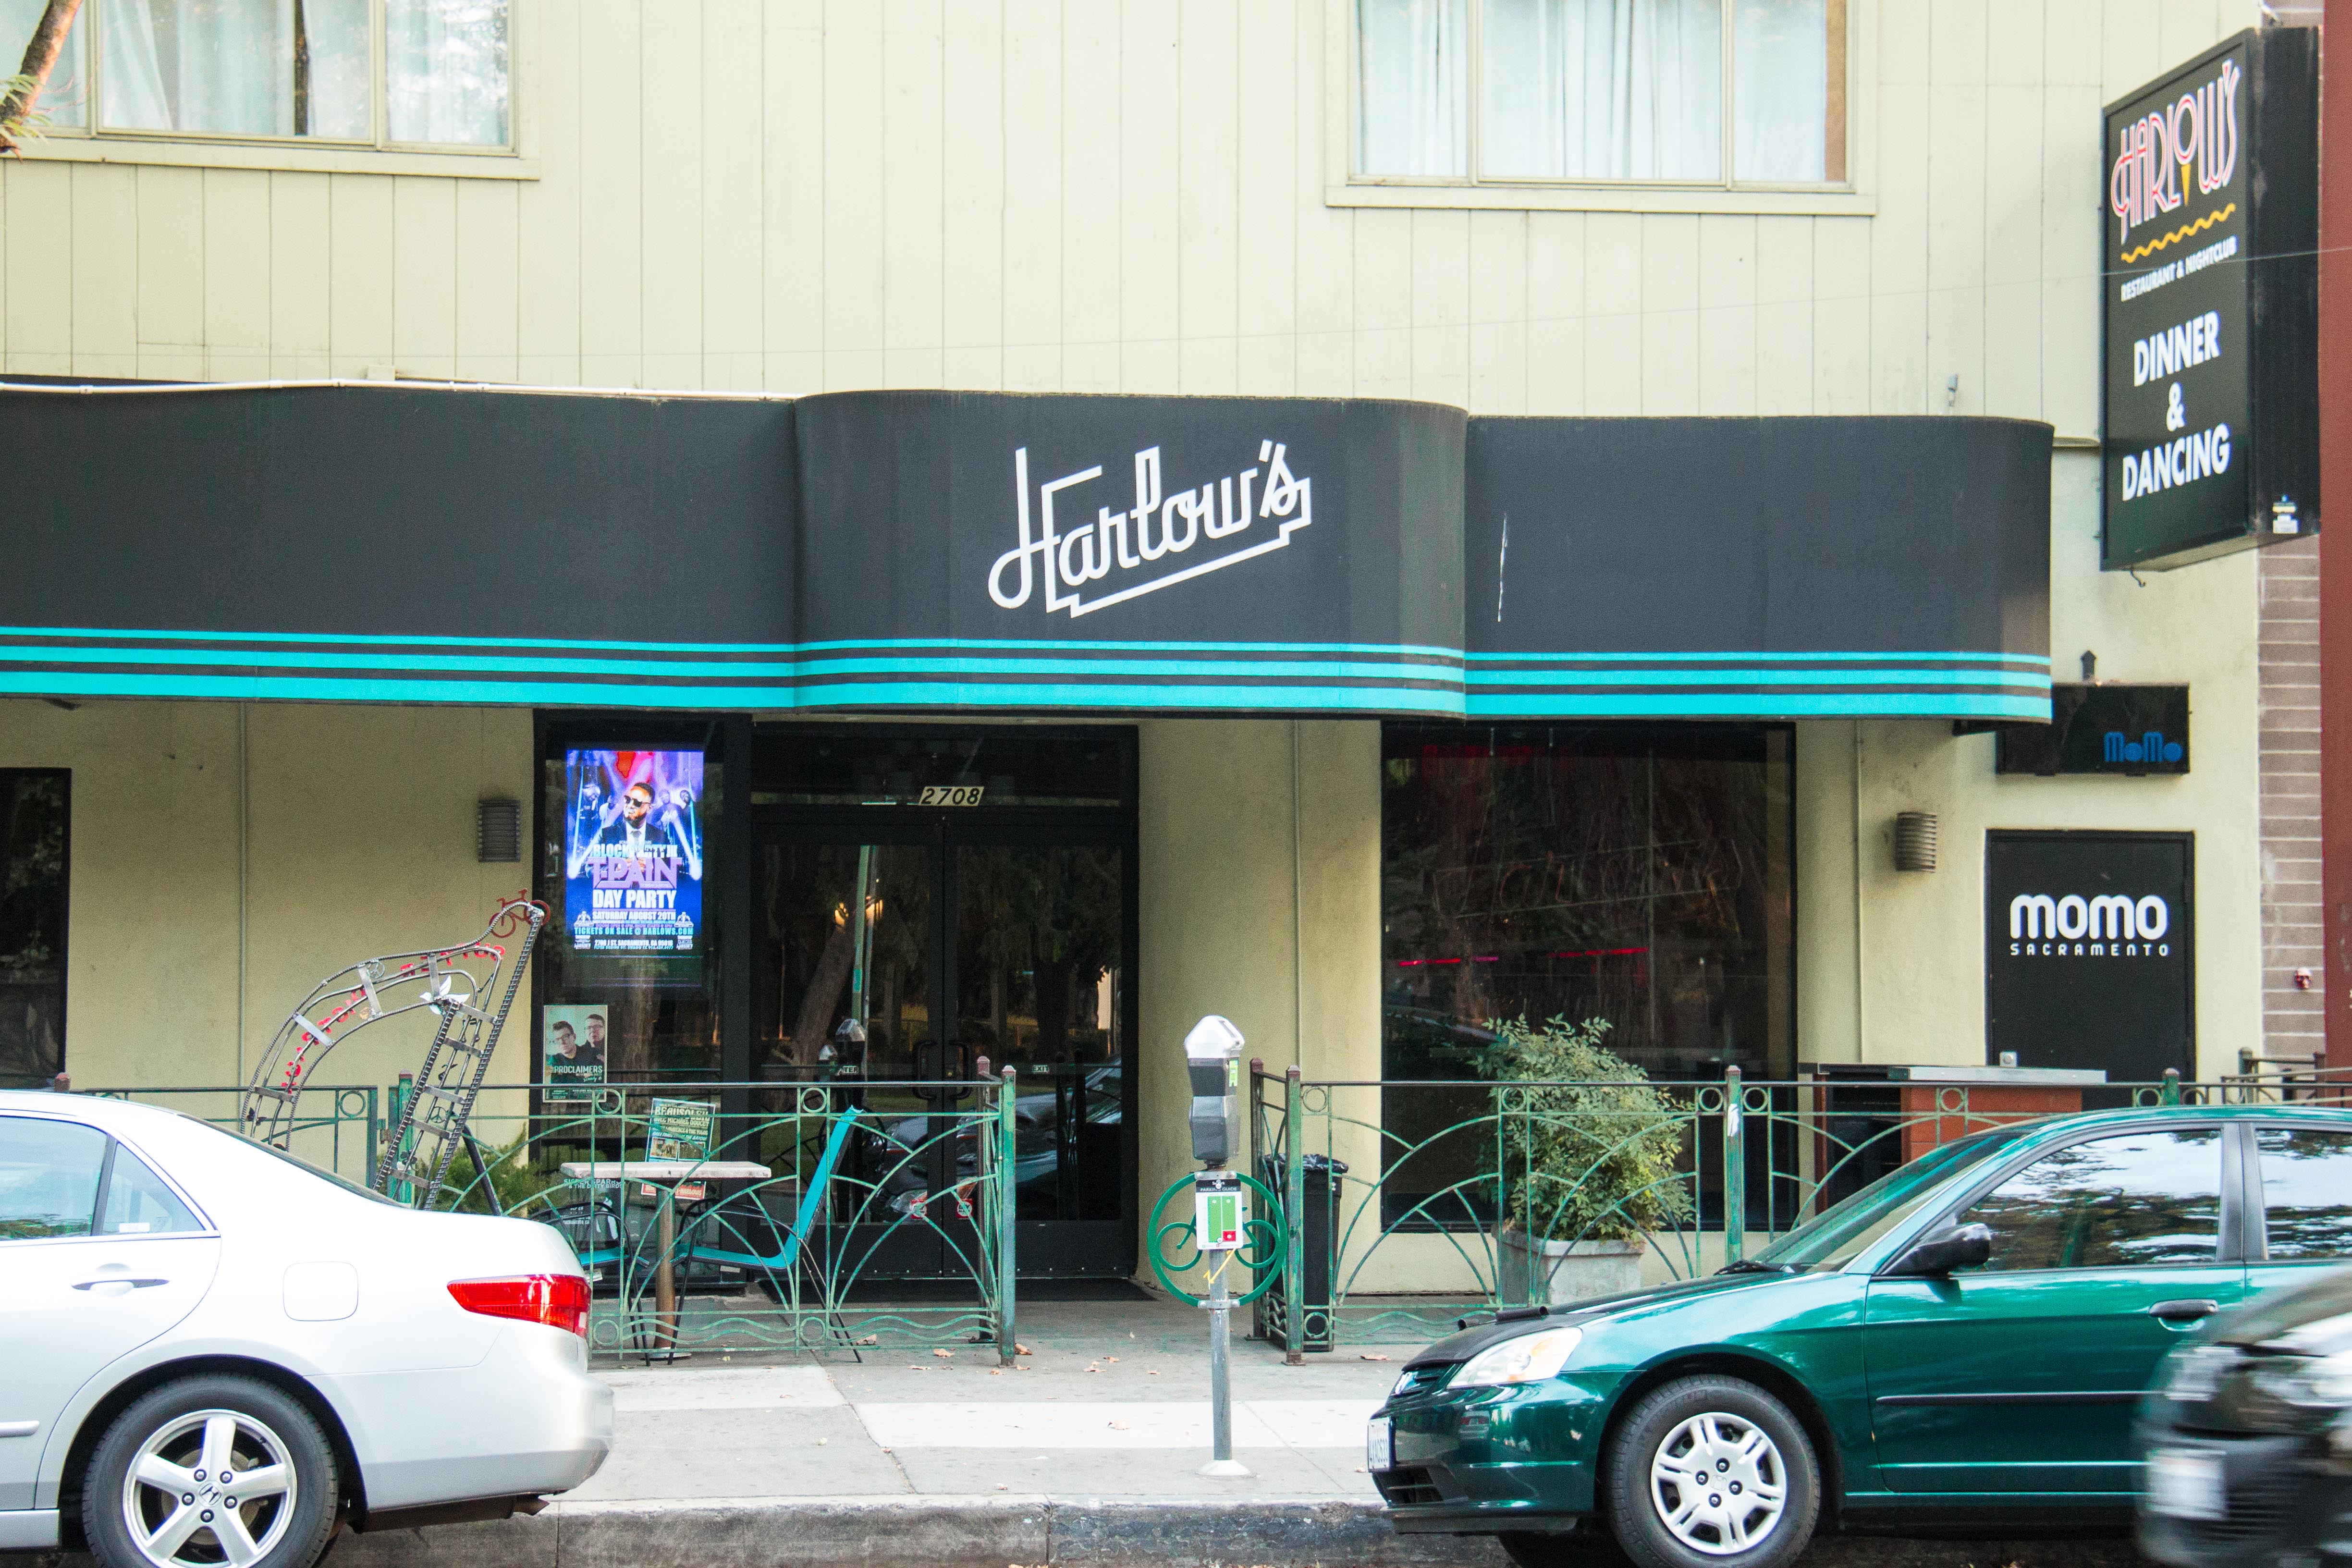 Harlow's, located in Midtown Sacramento, is a great place to see live music.